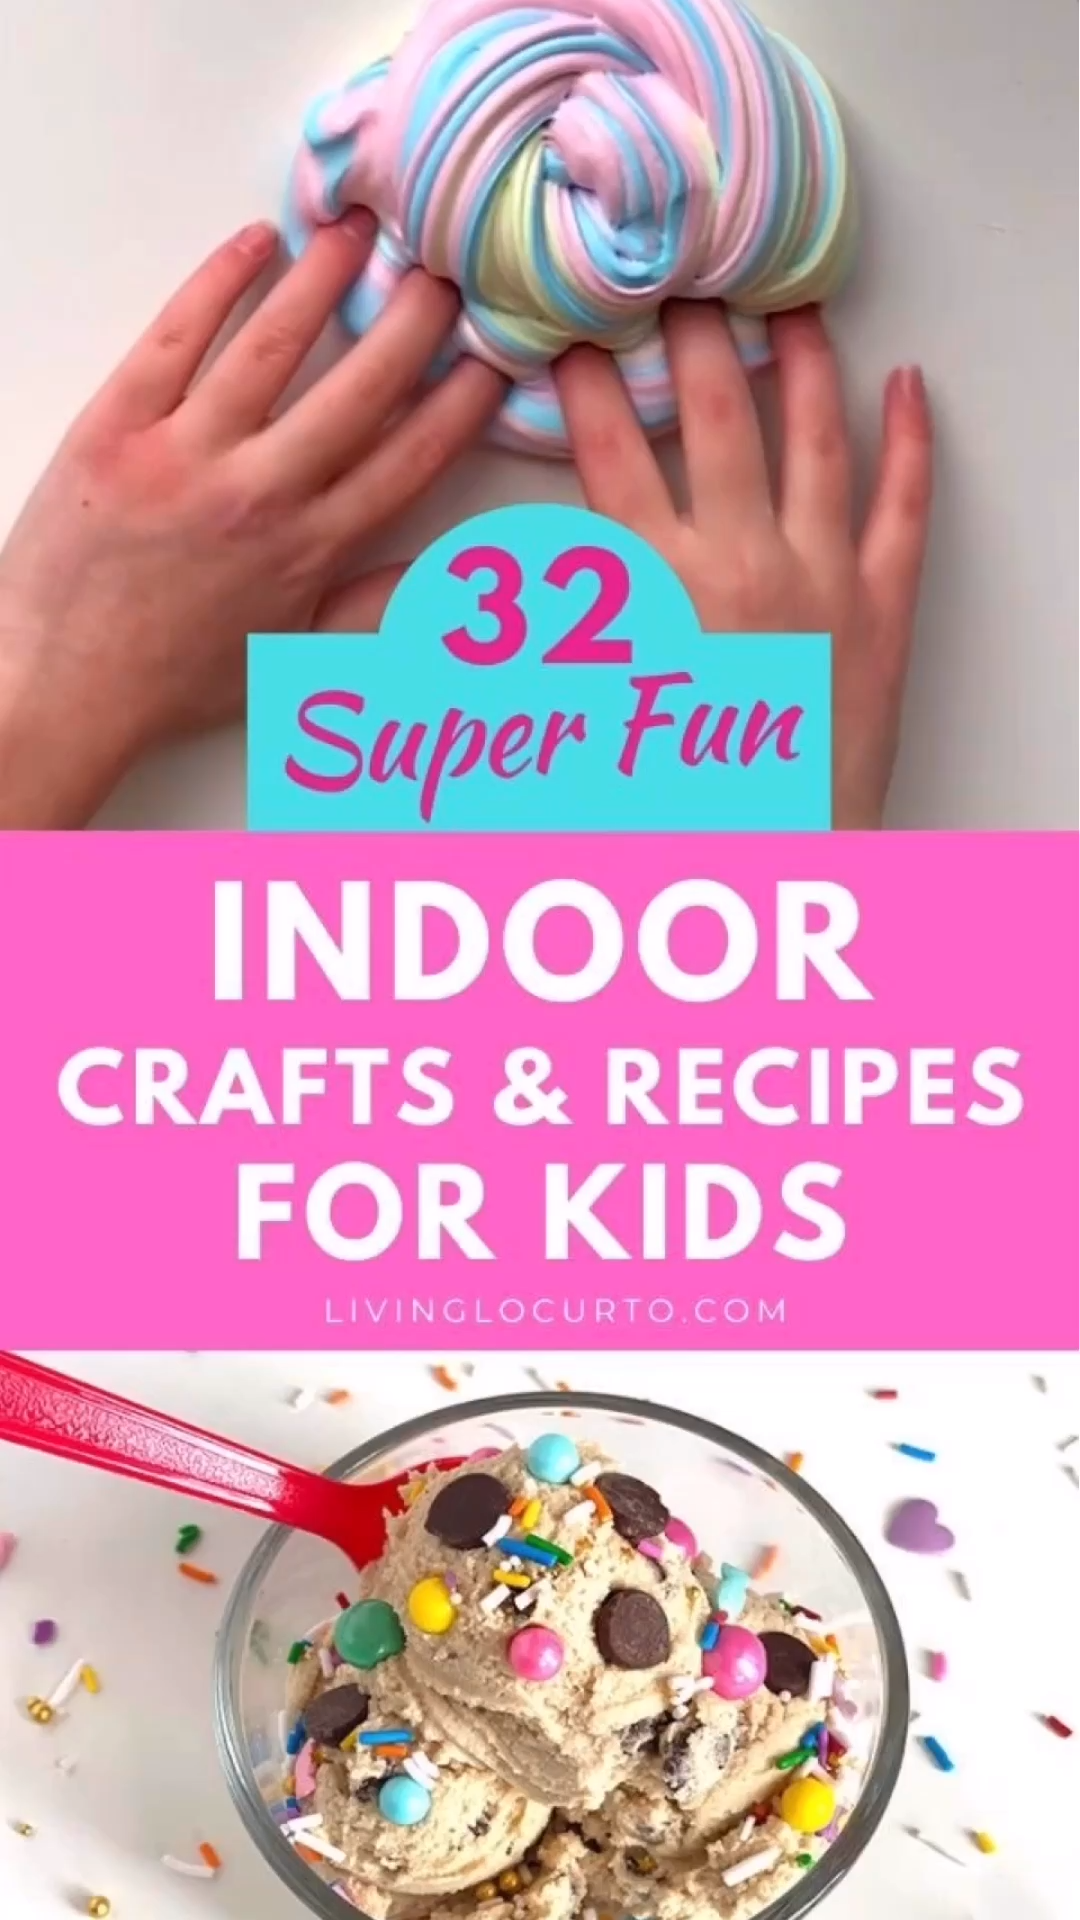 Indoor Crafts For Kids - Indoor Crafts For Kids -   18 diy Projects for teenagers ideas